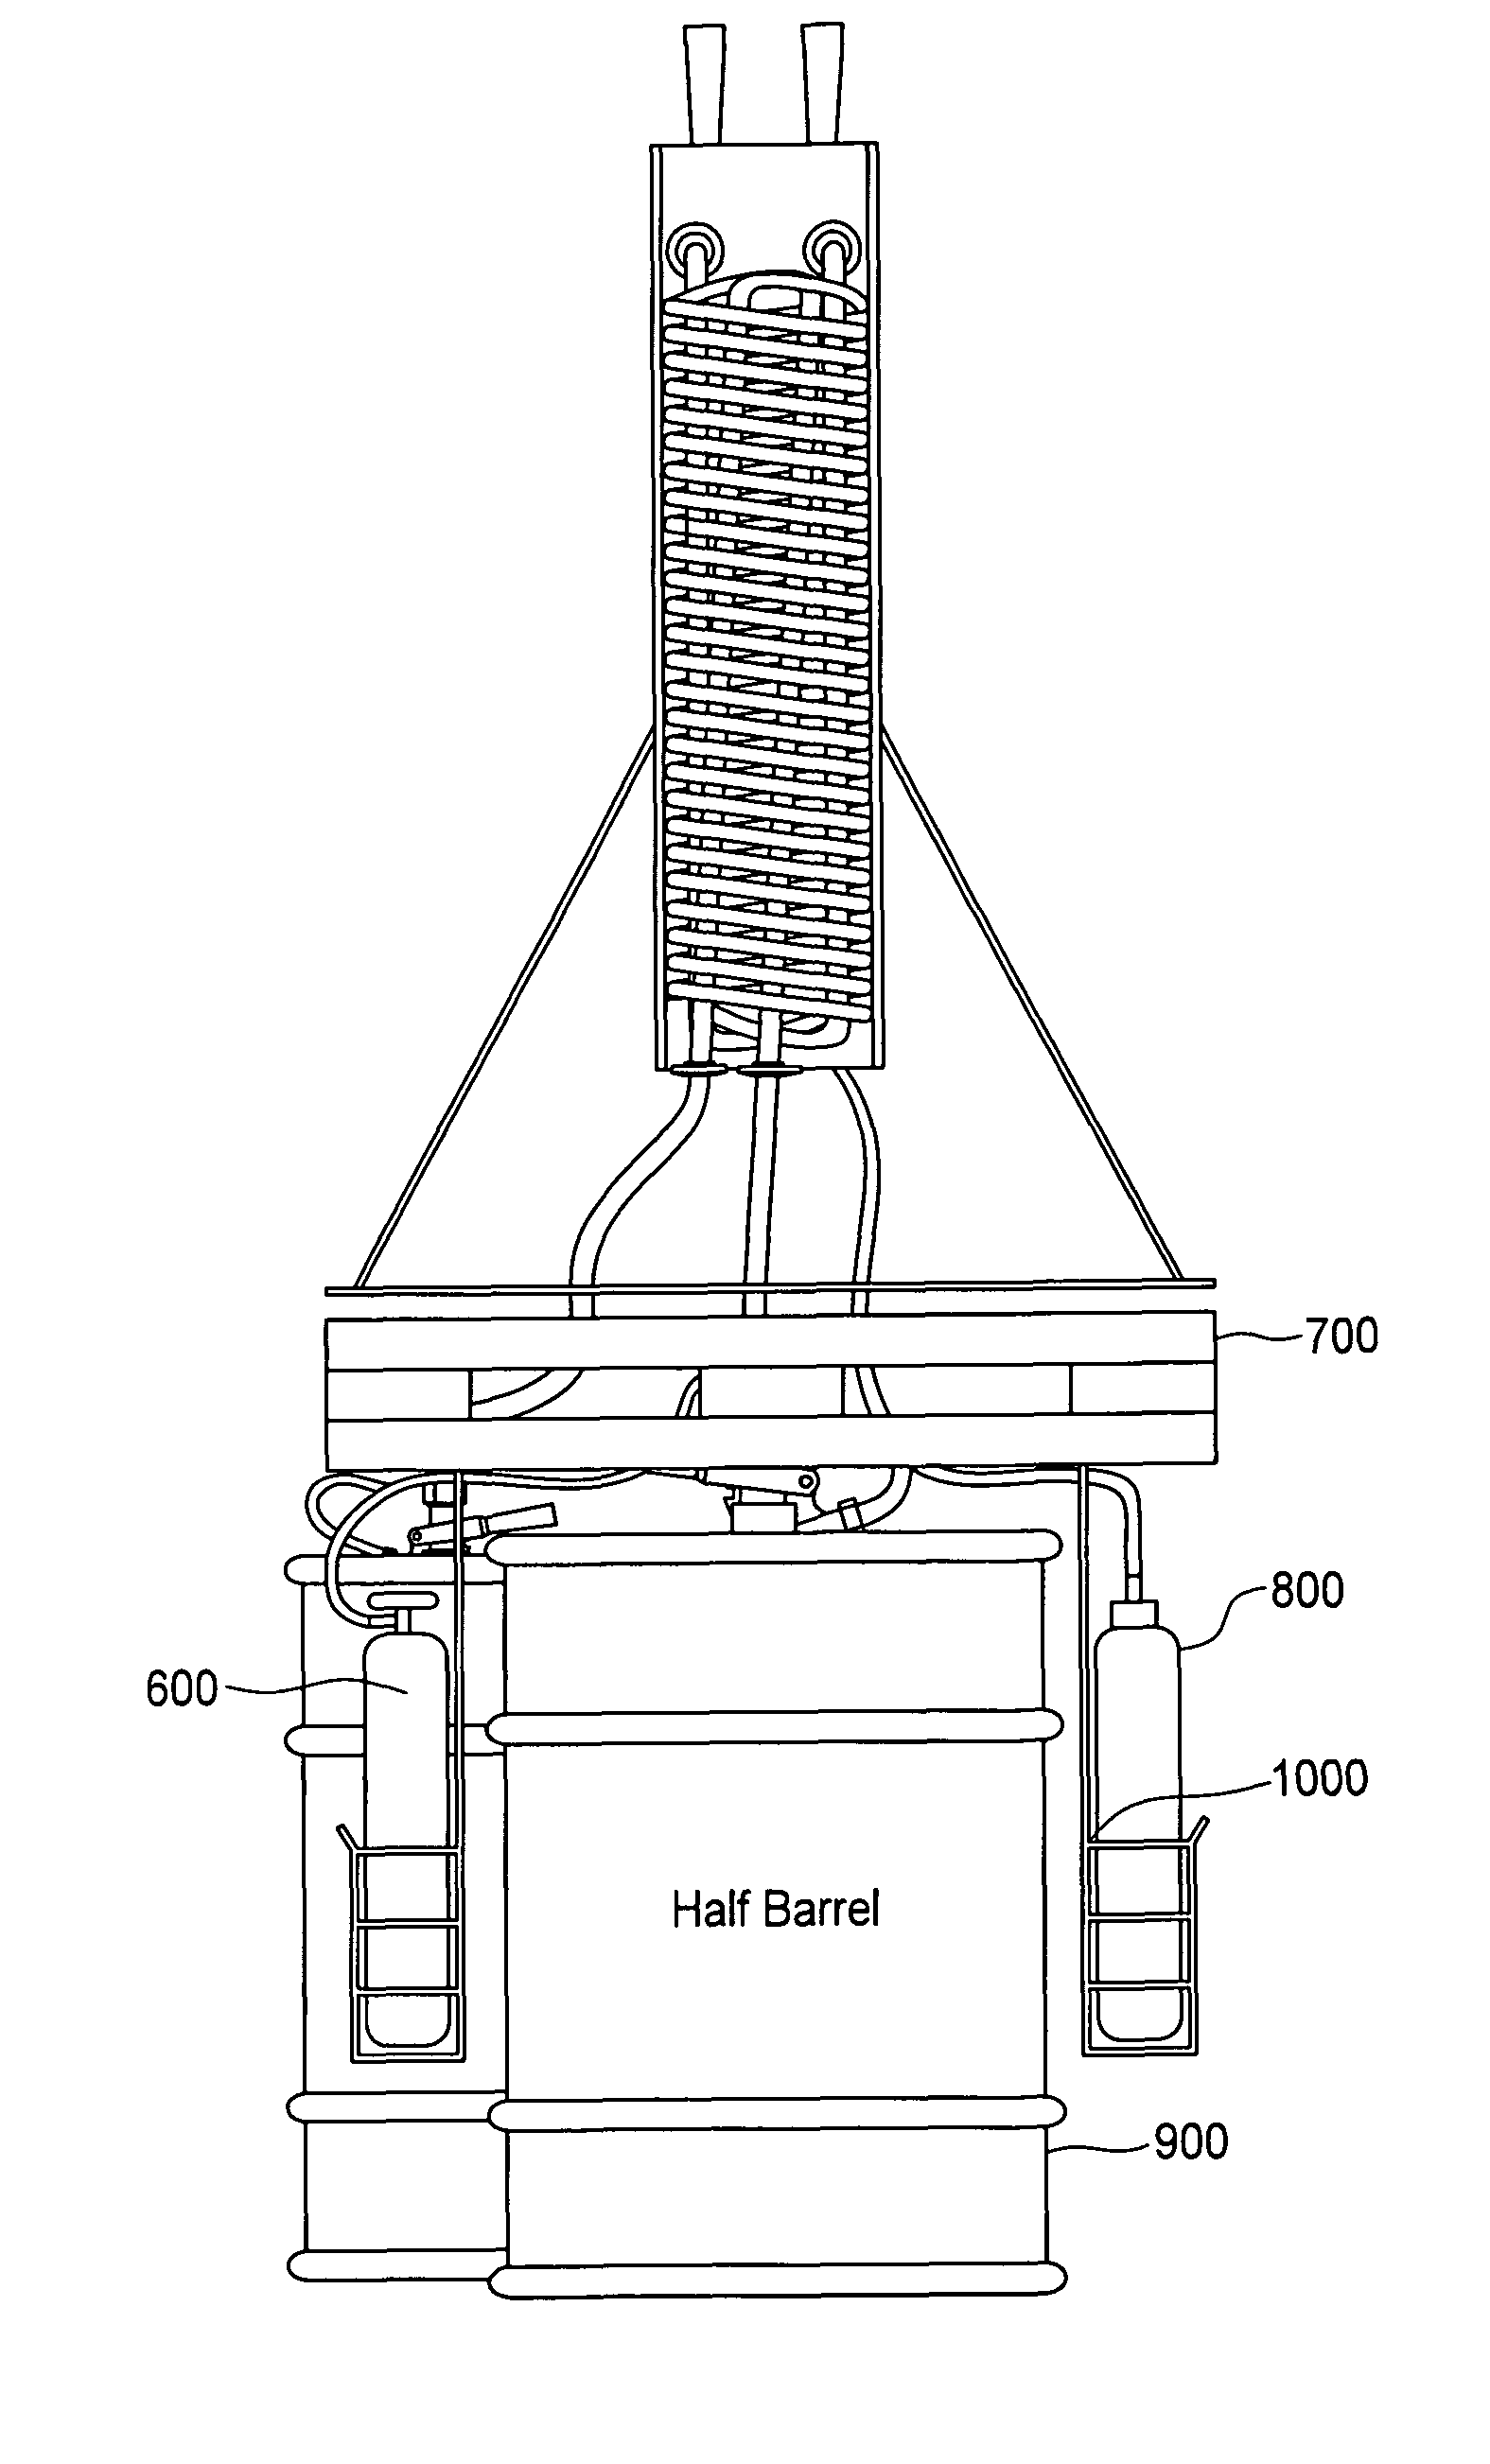 Beer dispensing device and system